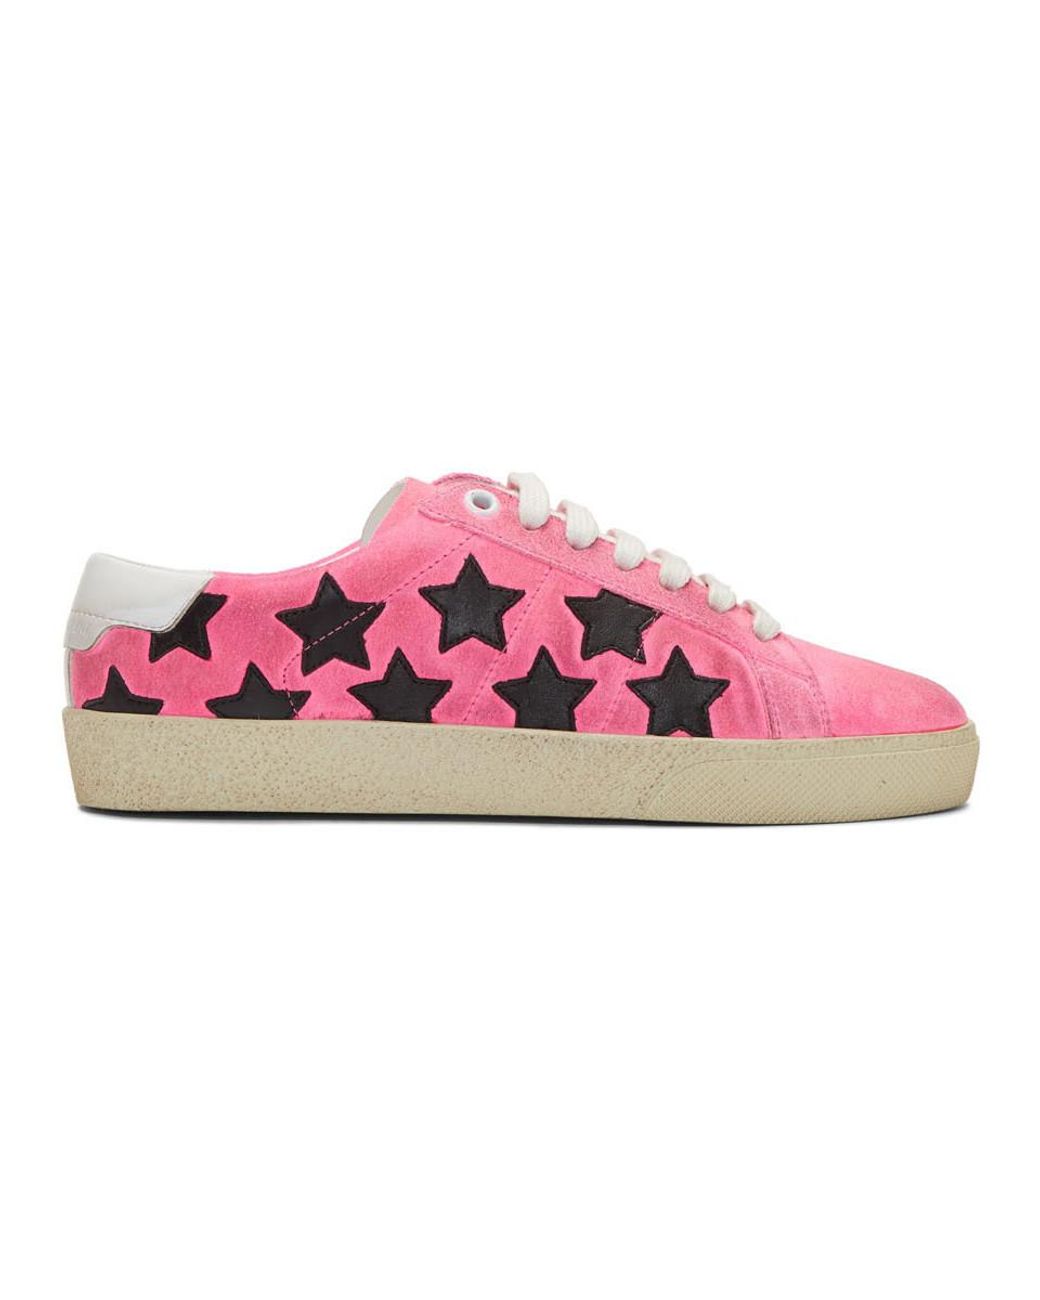 Saint Laurent Suede Court Classic Sl/06 Star Sneakers in Pink - Save 60 ...